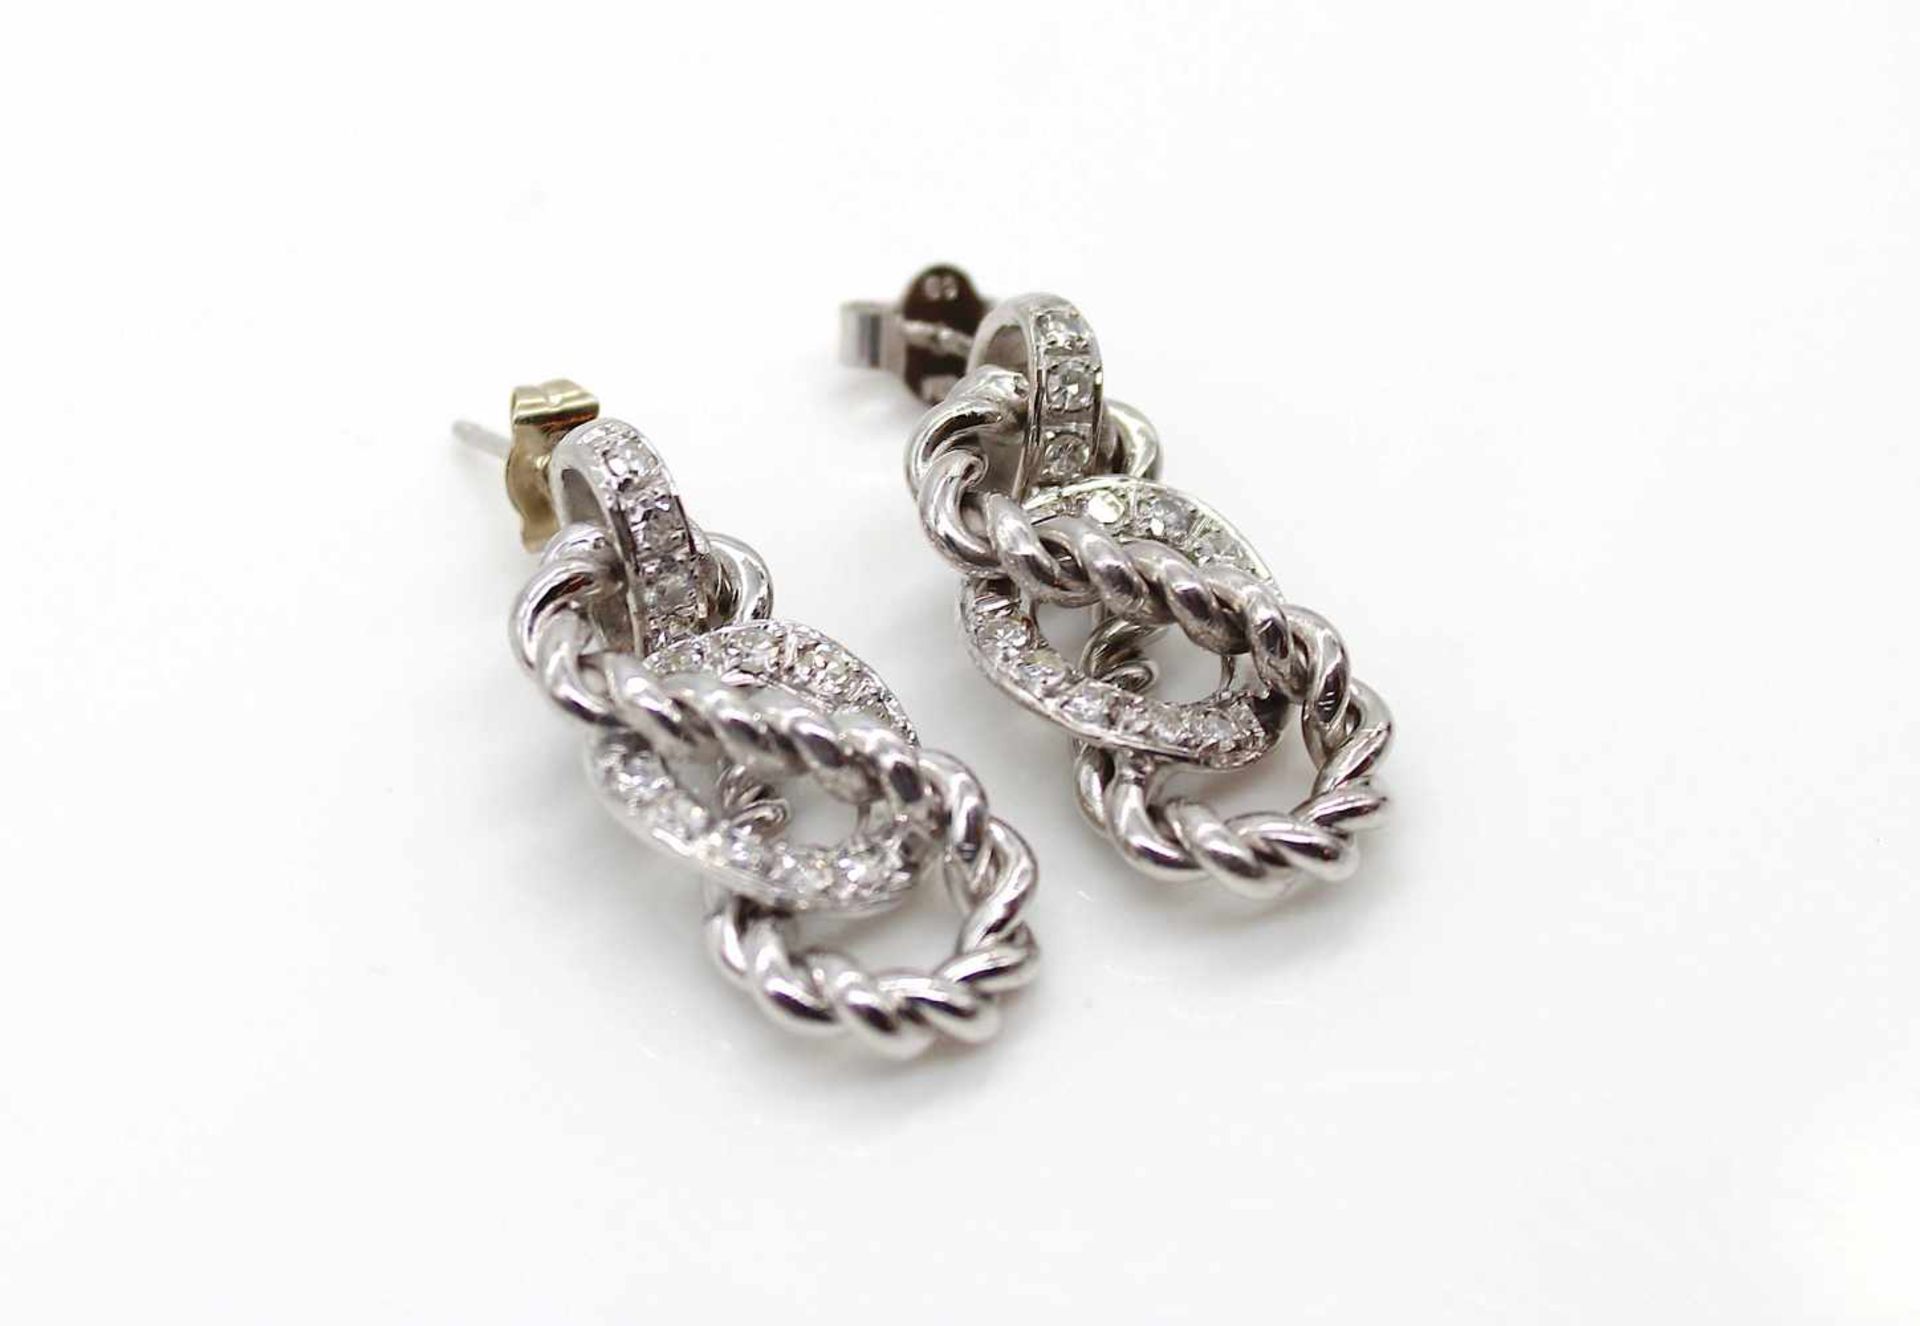 1 pair of earrings in 750 white gold with approx. 30 diamonds, total approx. 1 ct in high quality. - Bild 3 aus 4